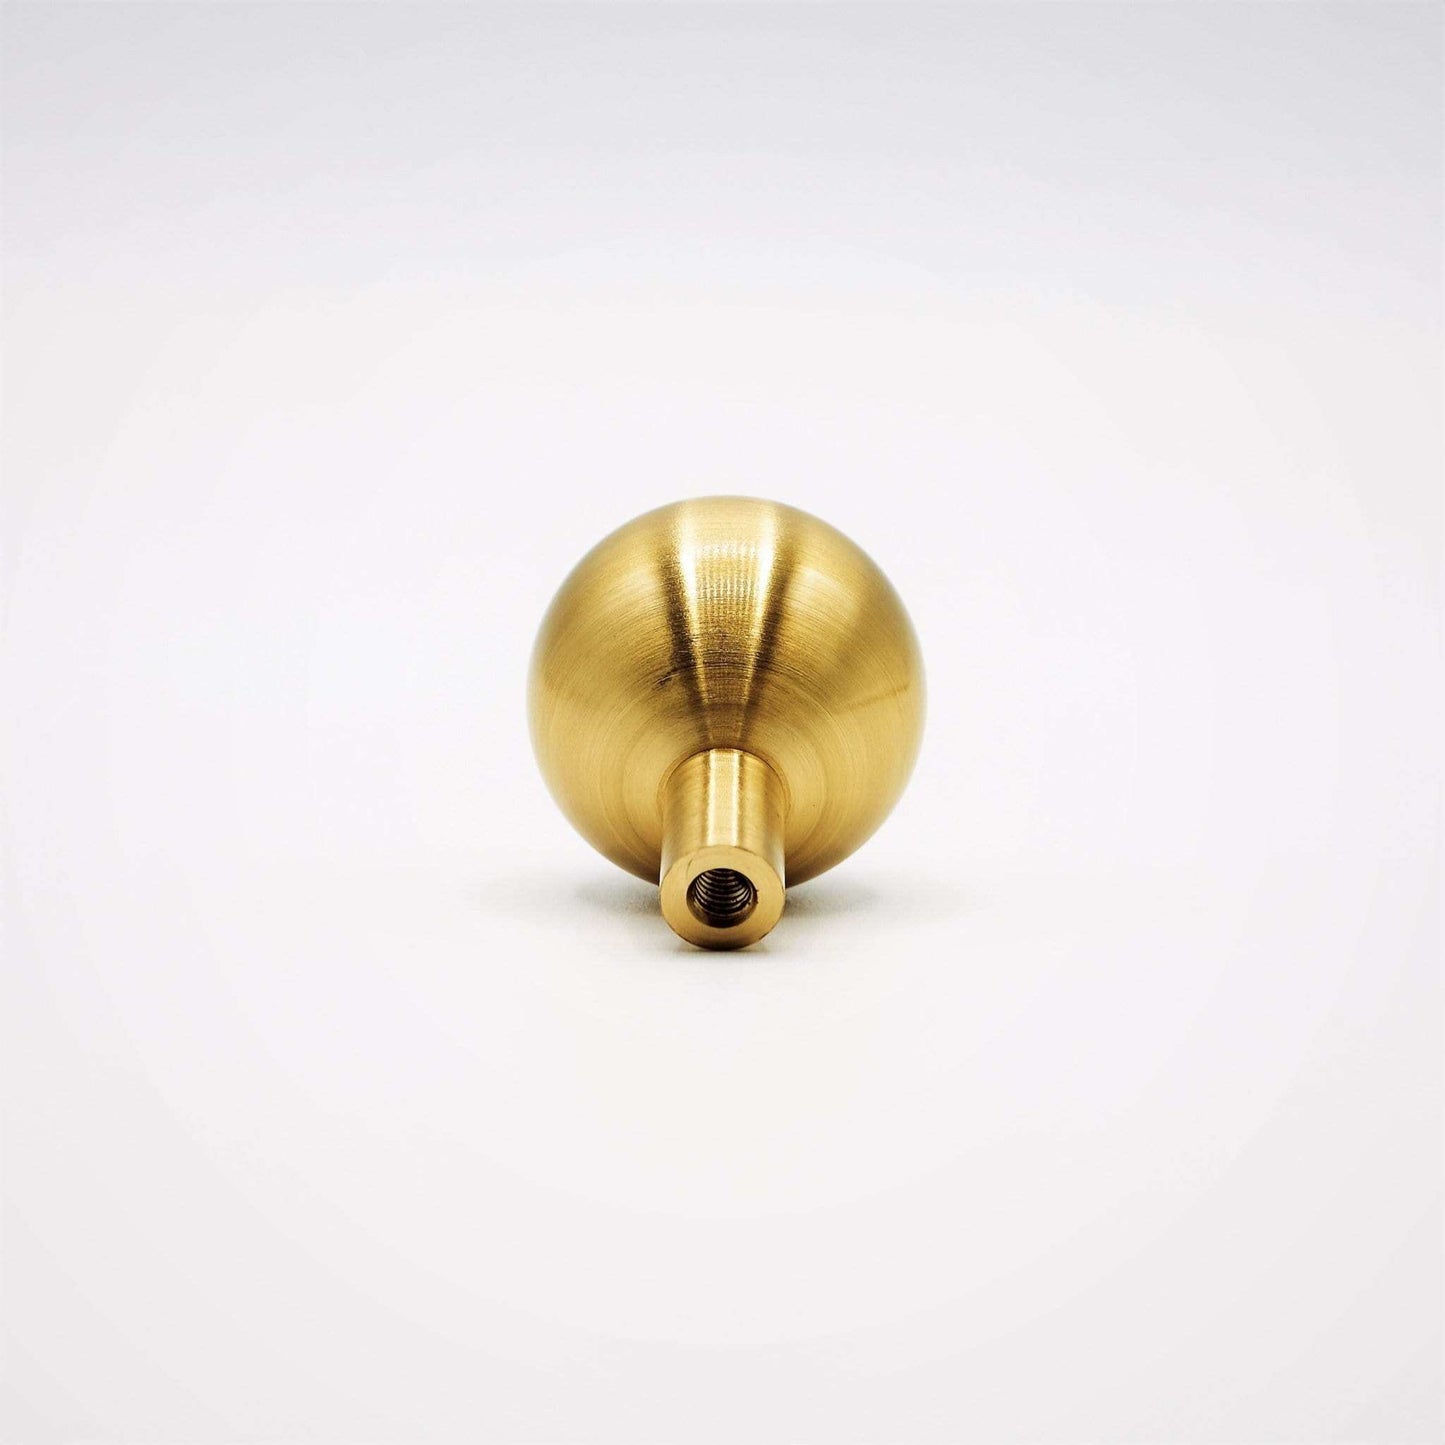 Dumas, Solid Brass Ball Knobs


Bring ideal equilibrium to contain all the volatility with Dumas.  The uniform expression brings tranquility, shining best in rooms beset by heat and light. It alKnobDumas, Solid Brass Ball Knobs